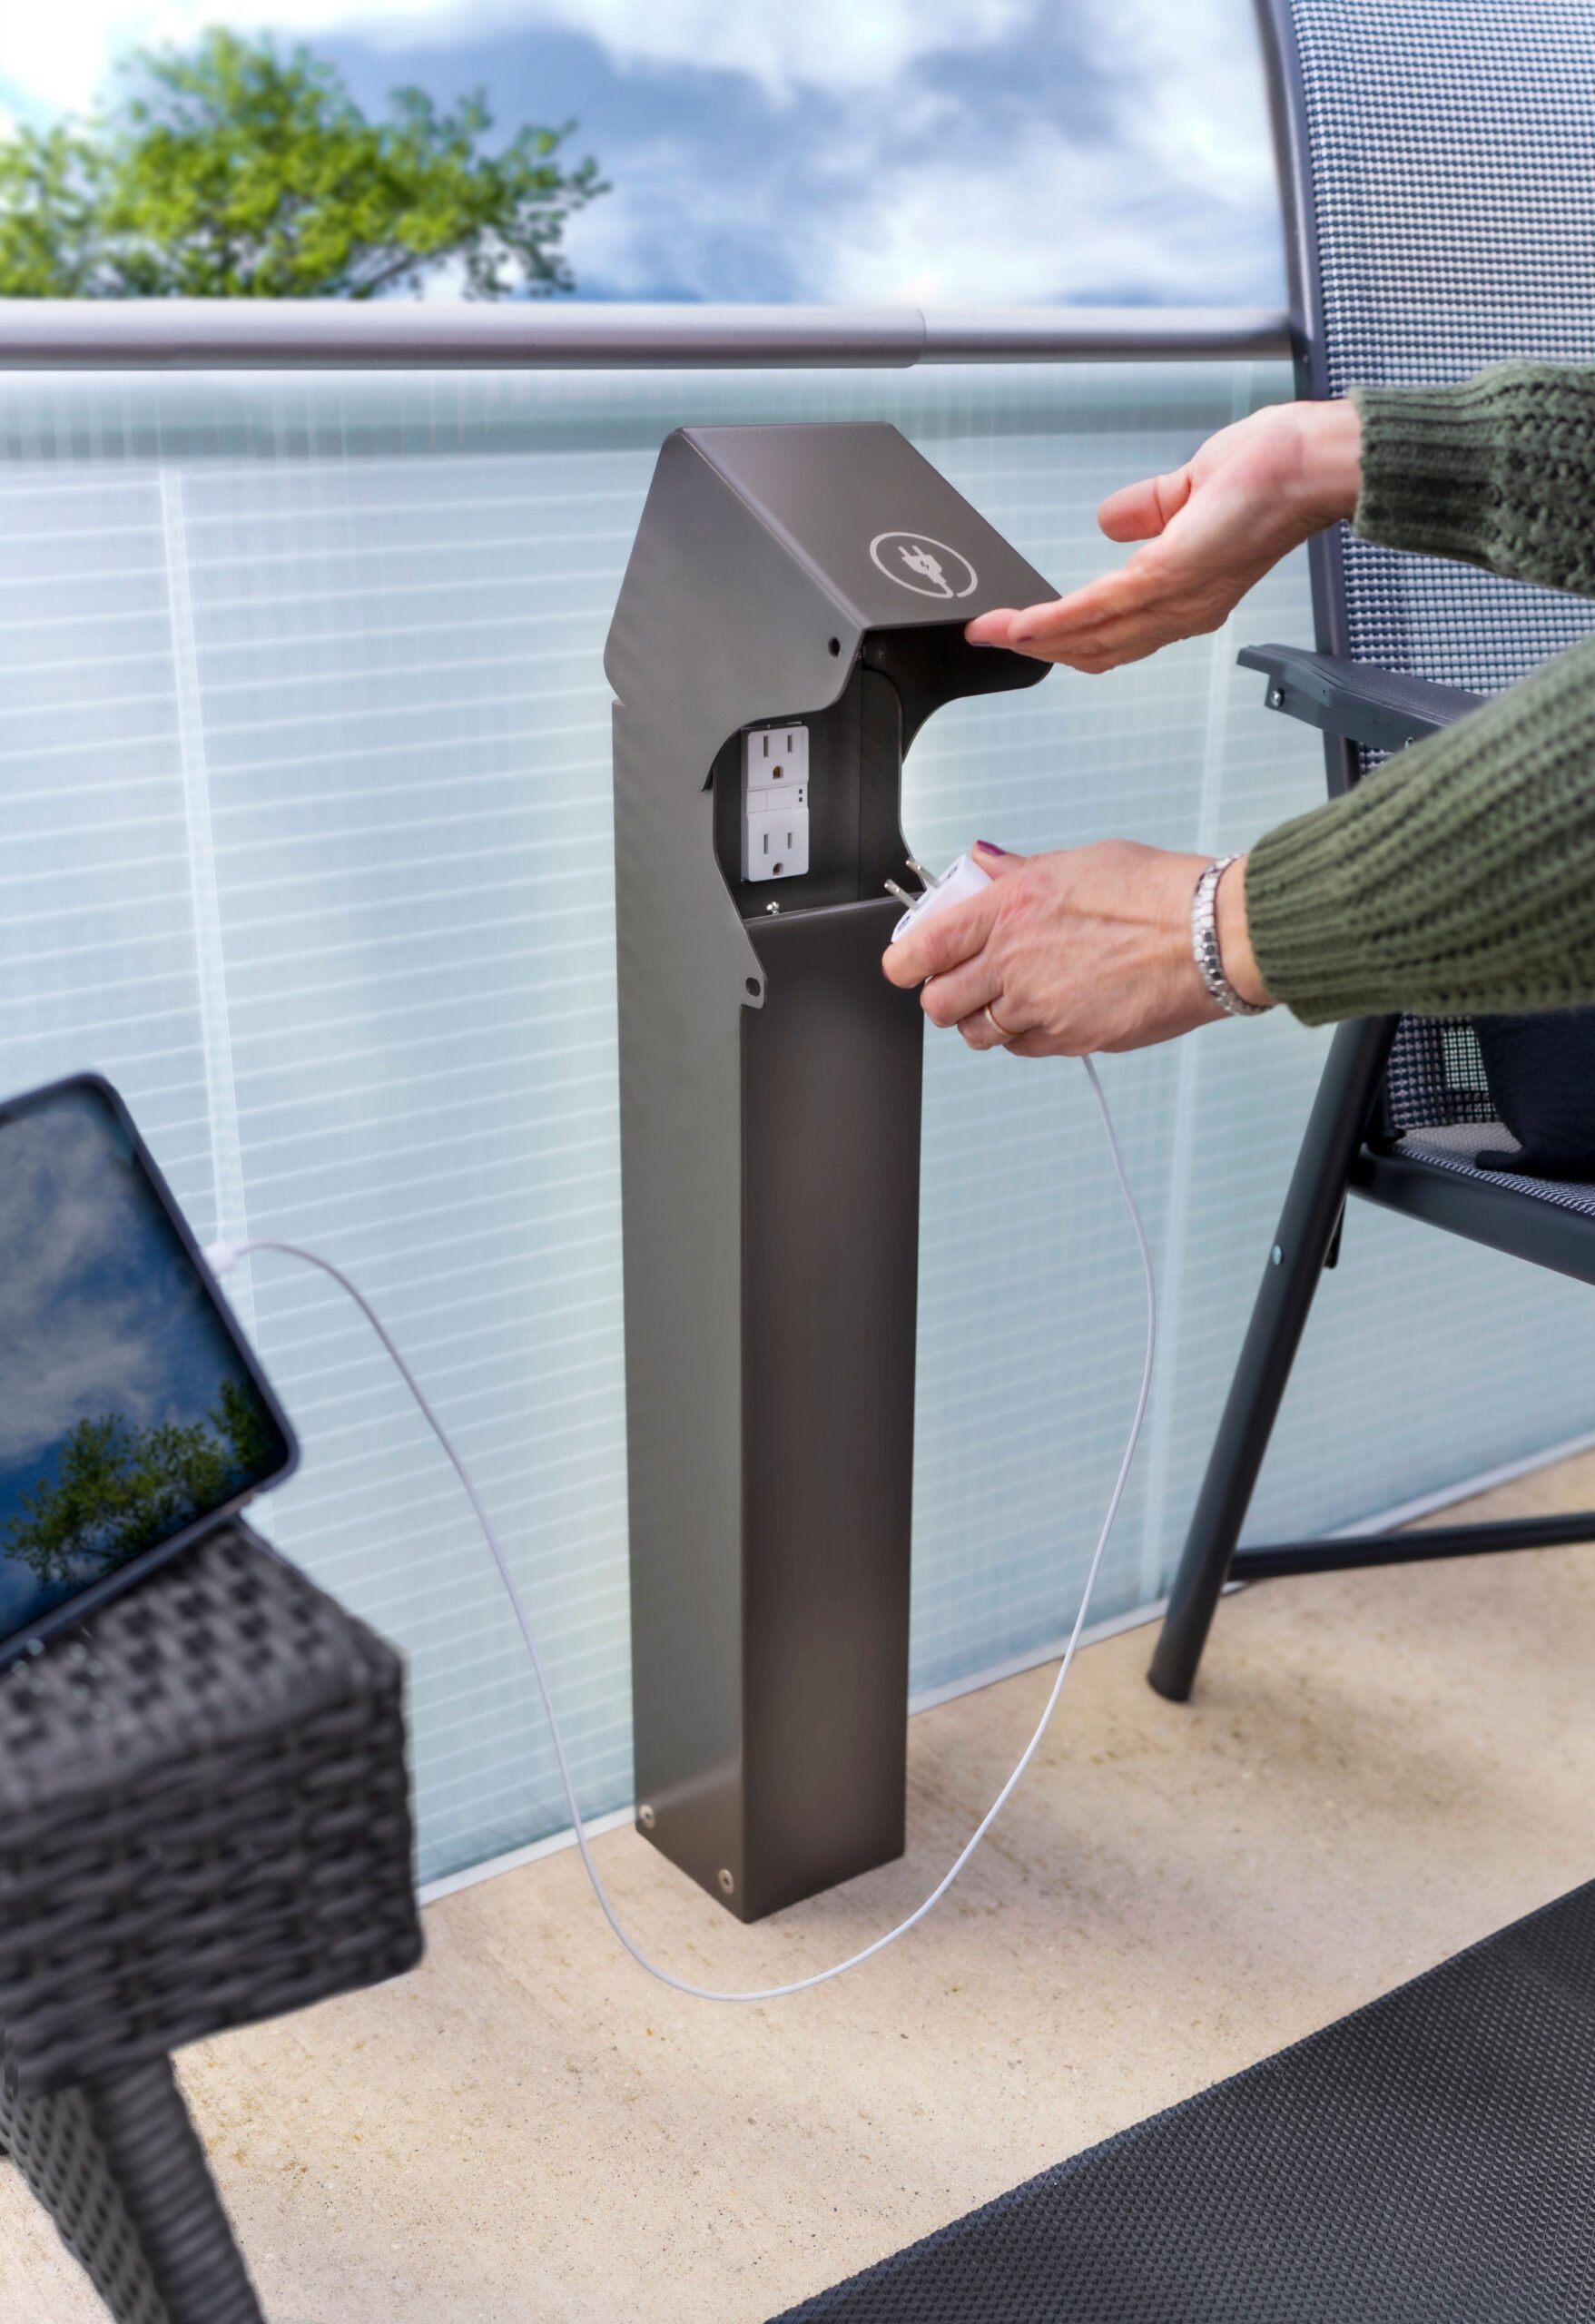 Outdoor power pedestal mounted flush to glass charging an Ipad